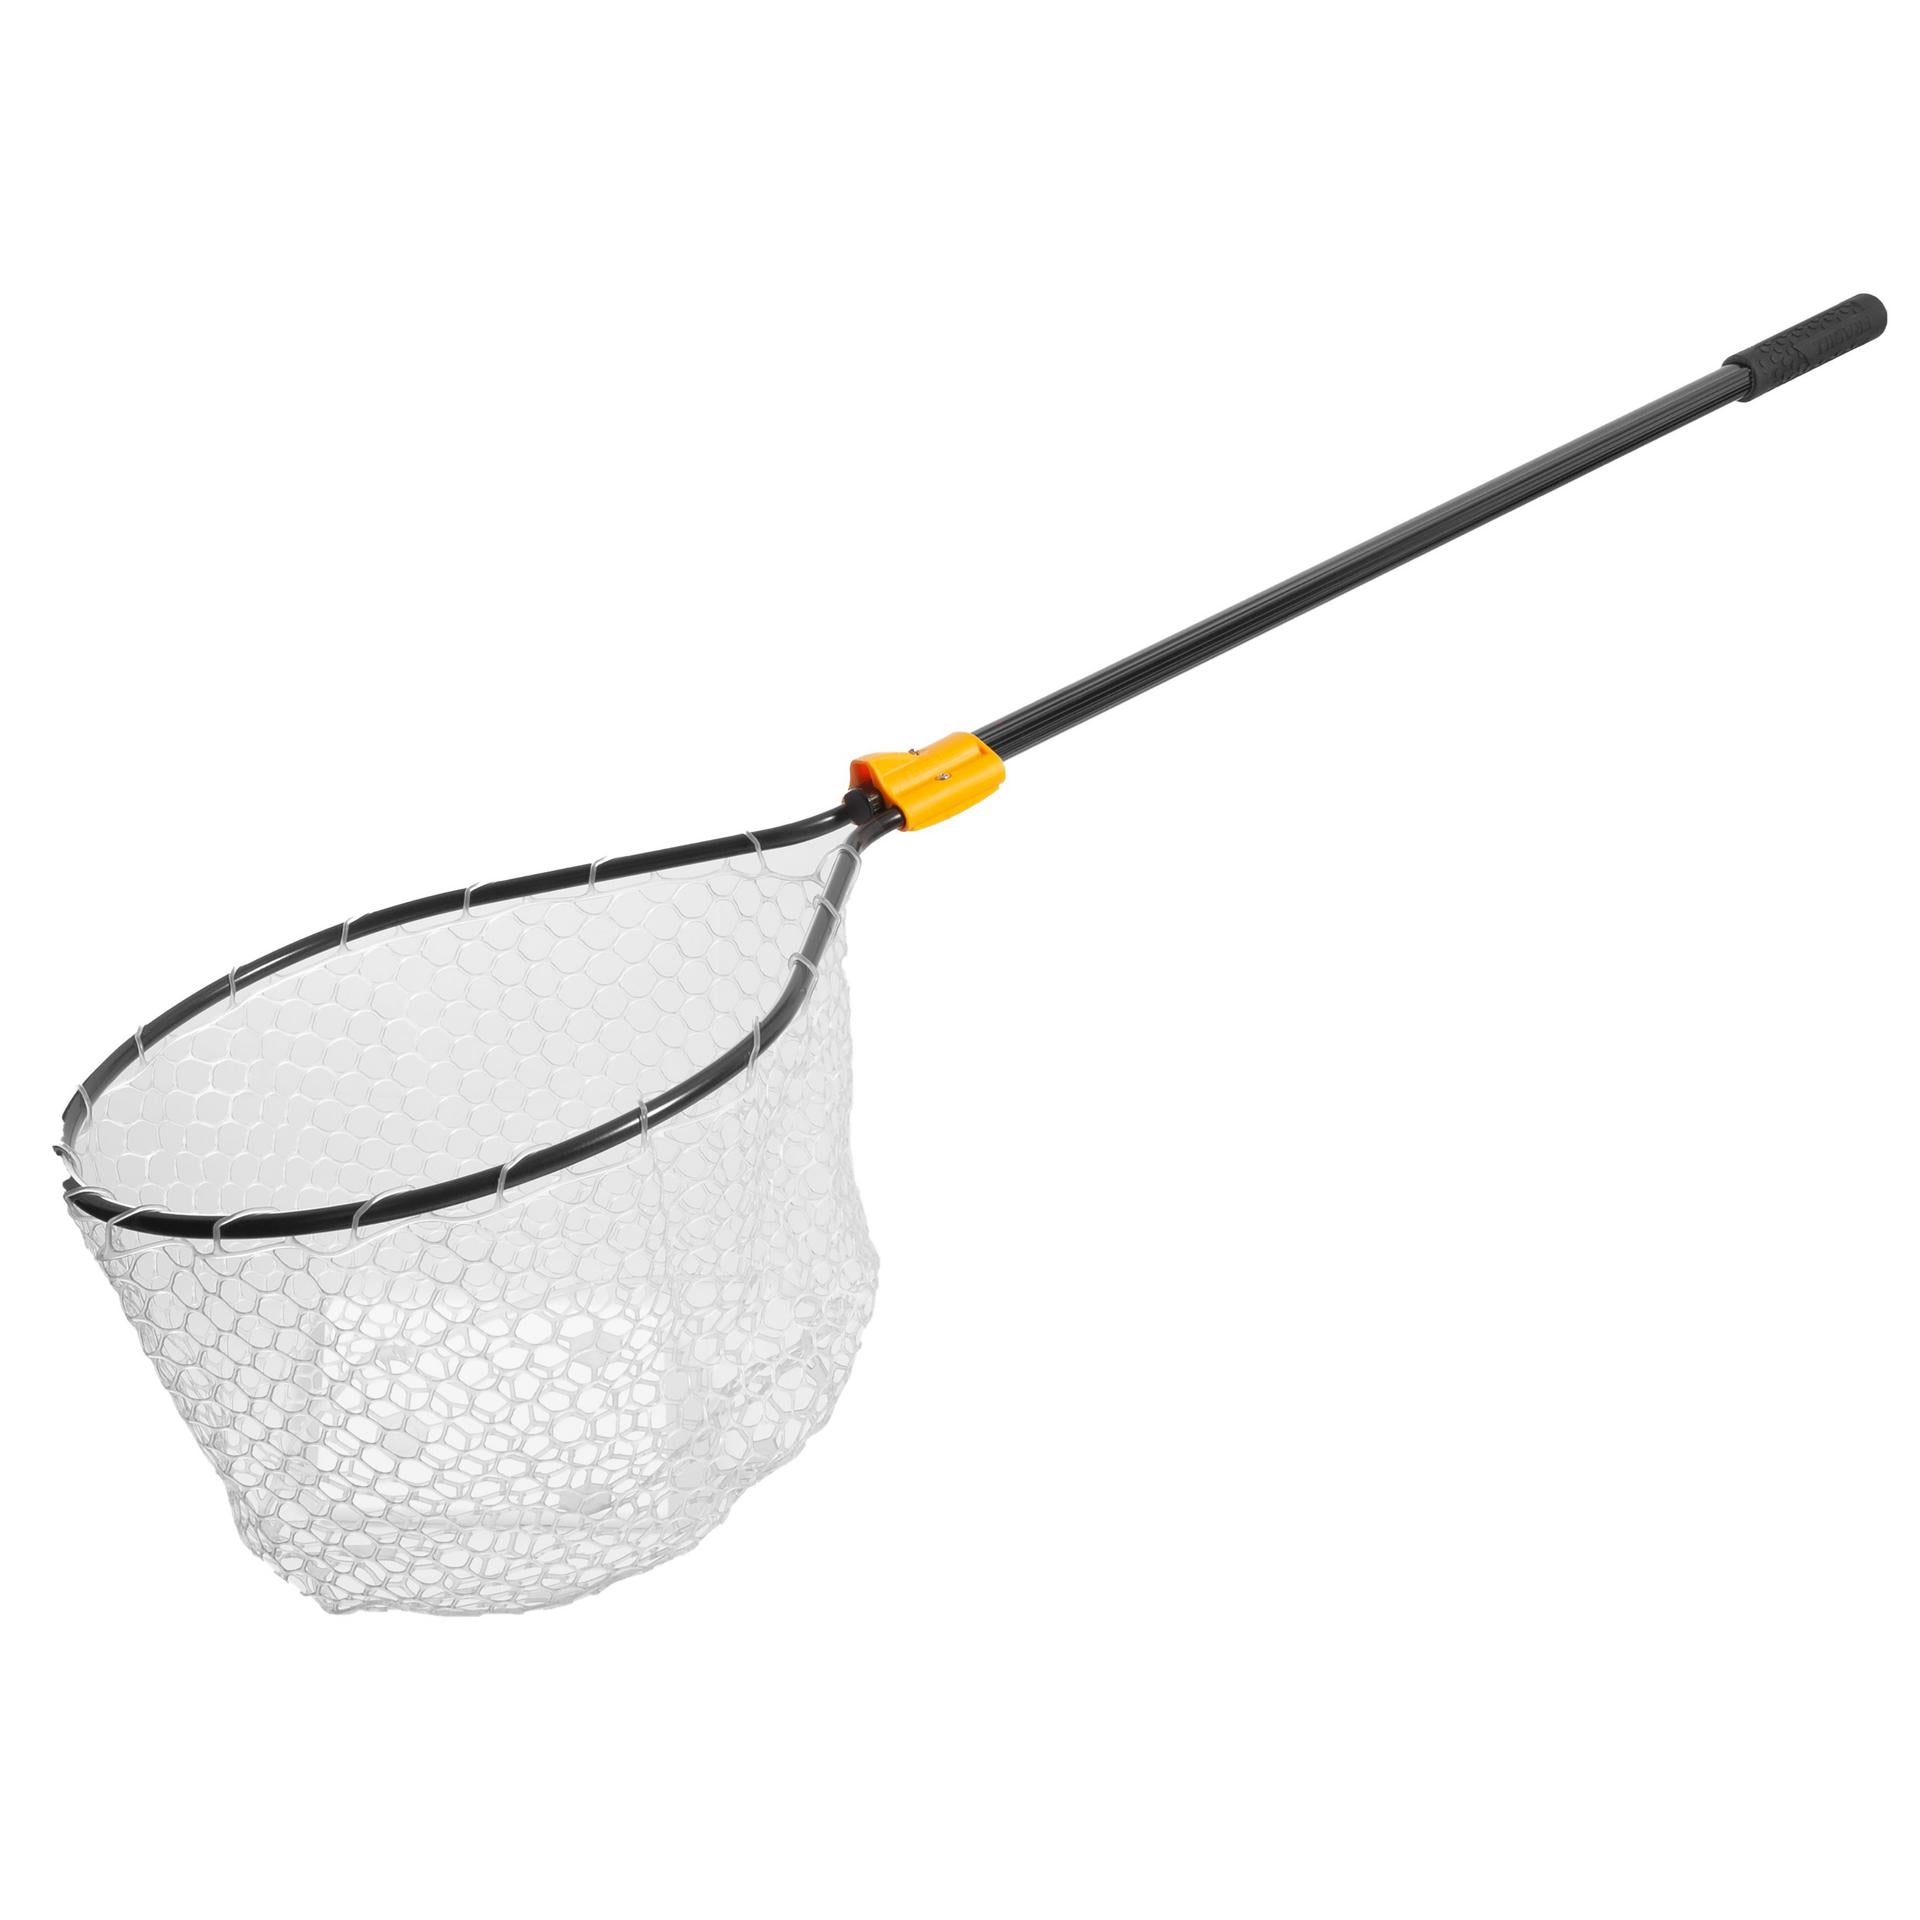 Smelt/Shad Net with D-Shaped Hoop and Fixed Handle